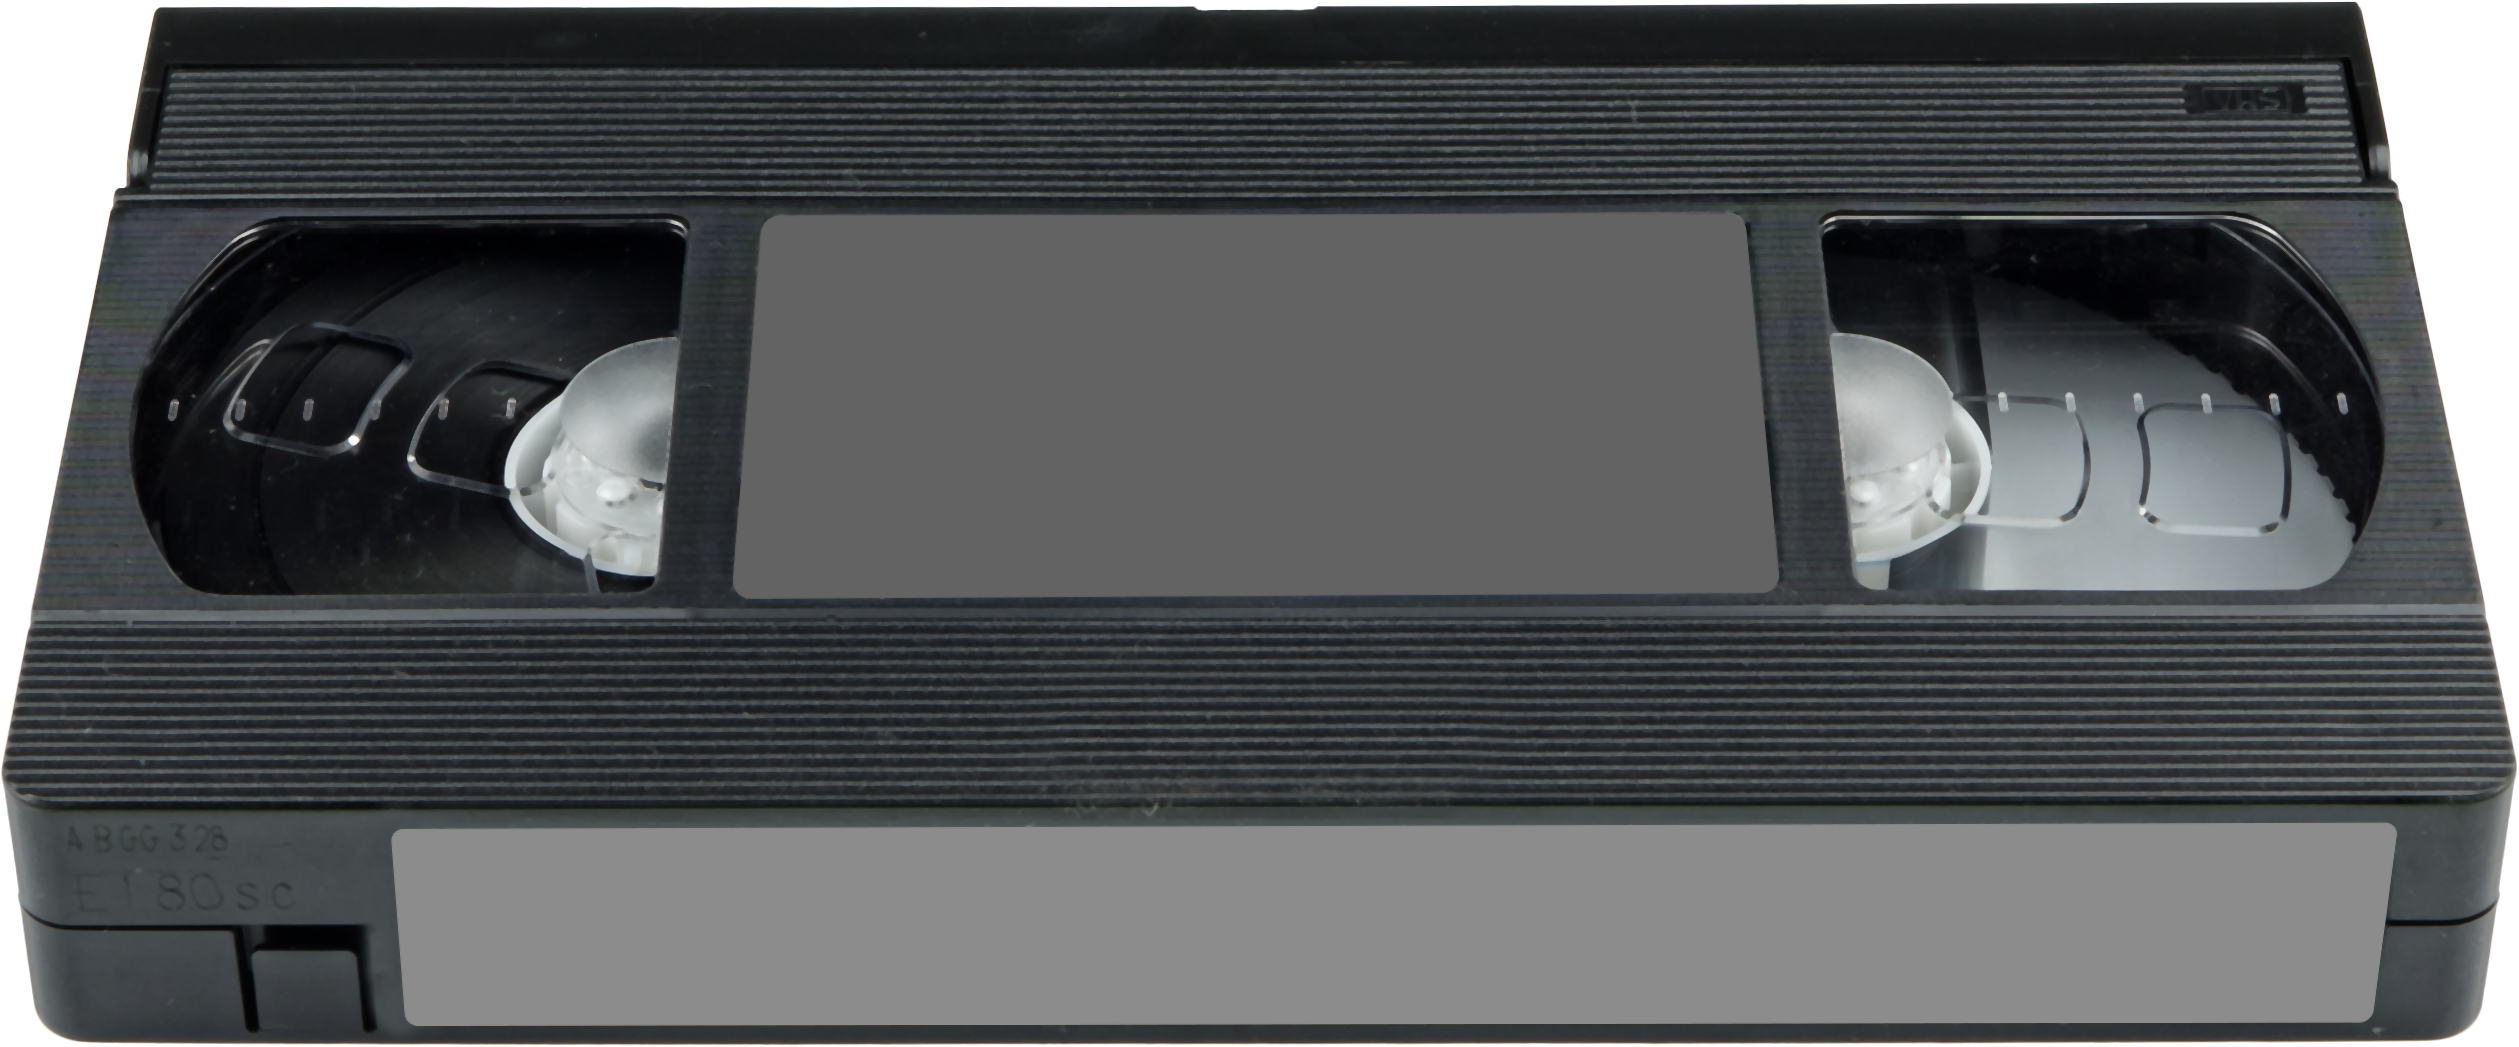 Vhs Tape Png - Vhs Tape, Transparent background PNG HD thumbnail